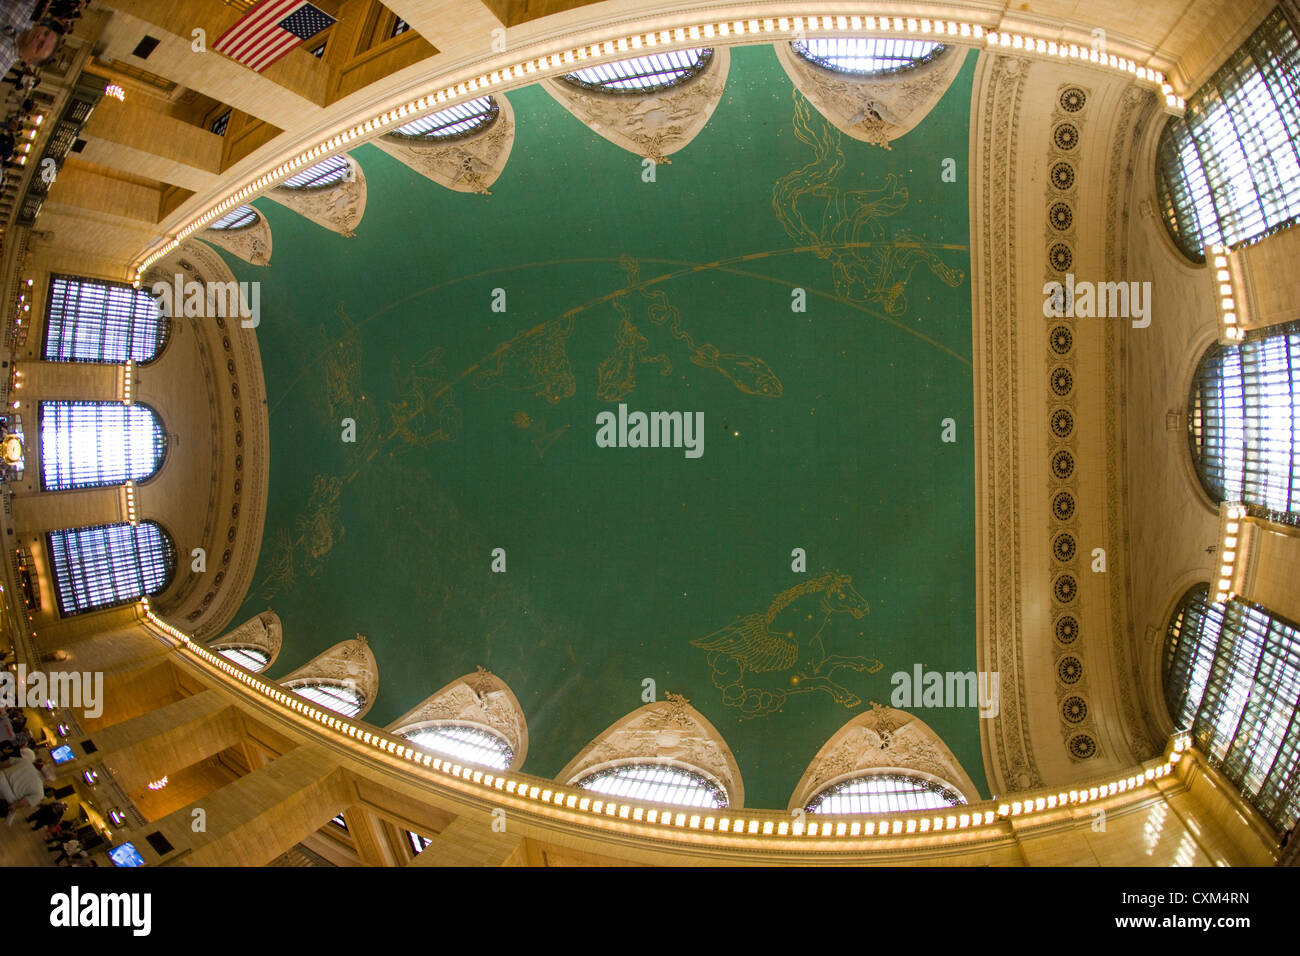 The ceiling of the Grand Central Station in New York Stock Photo